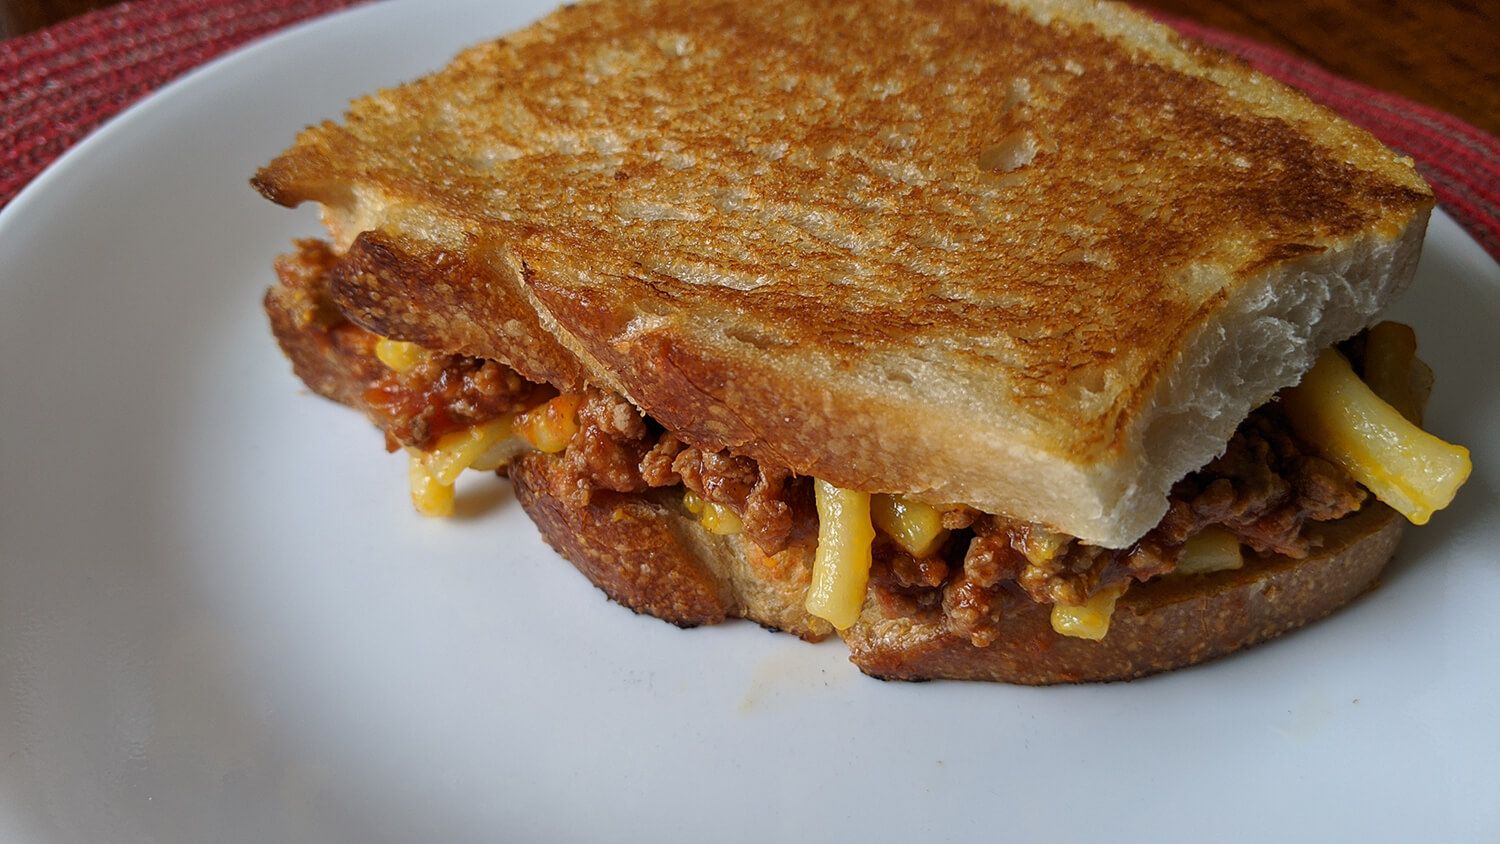 9. Sloppy Joe Grilled Cheese with Mac & Cheese